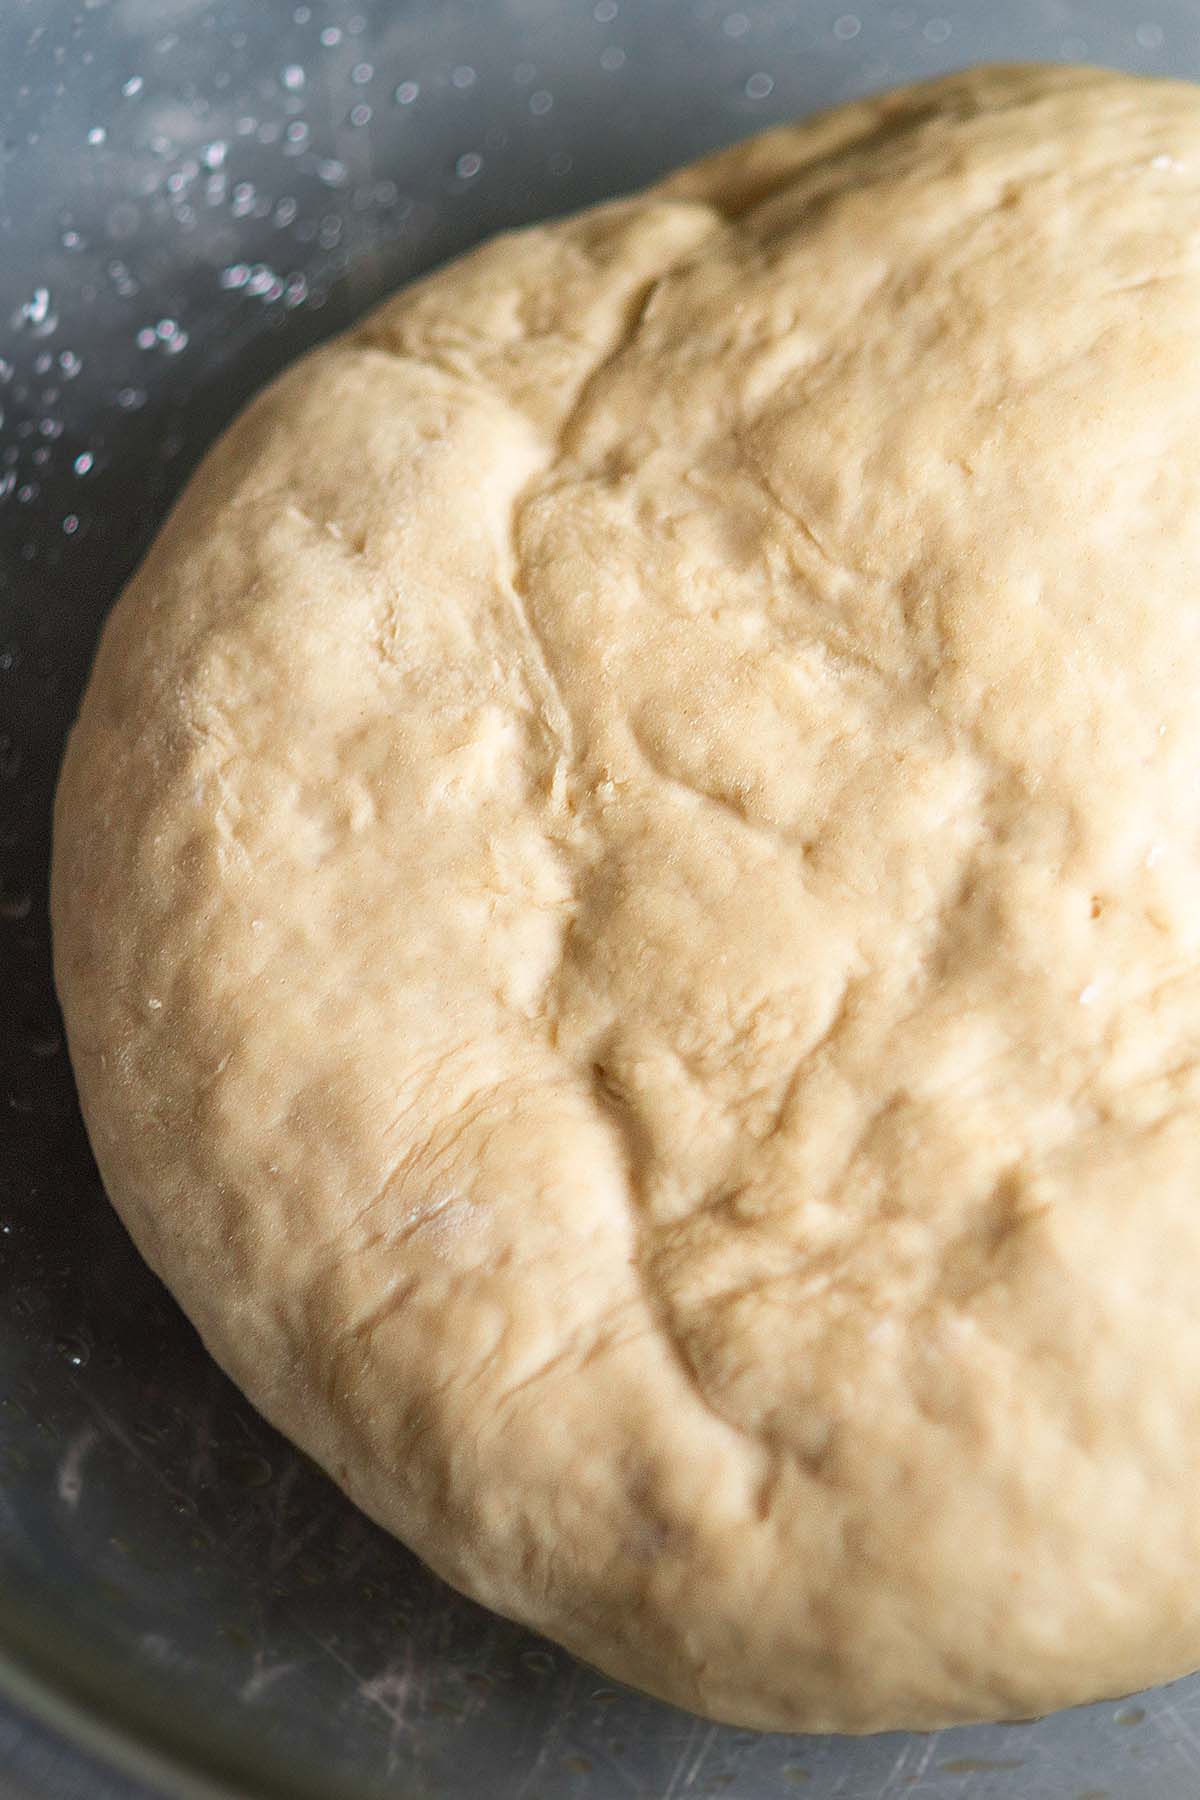 White bread dough kneaded and shaped.